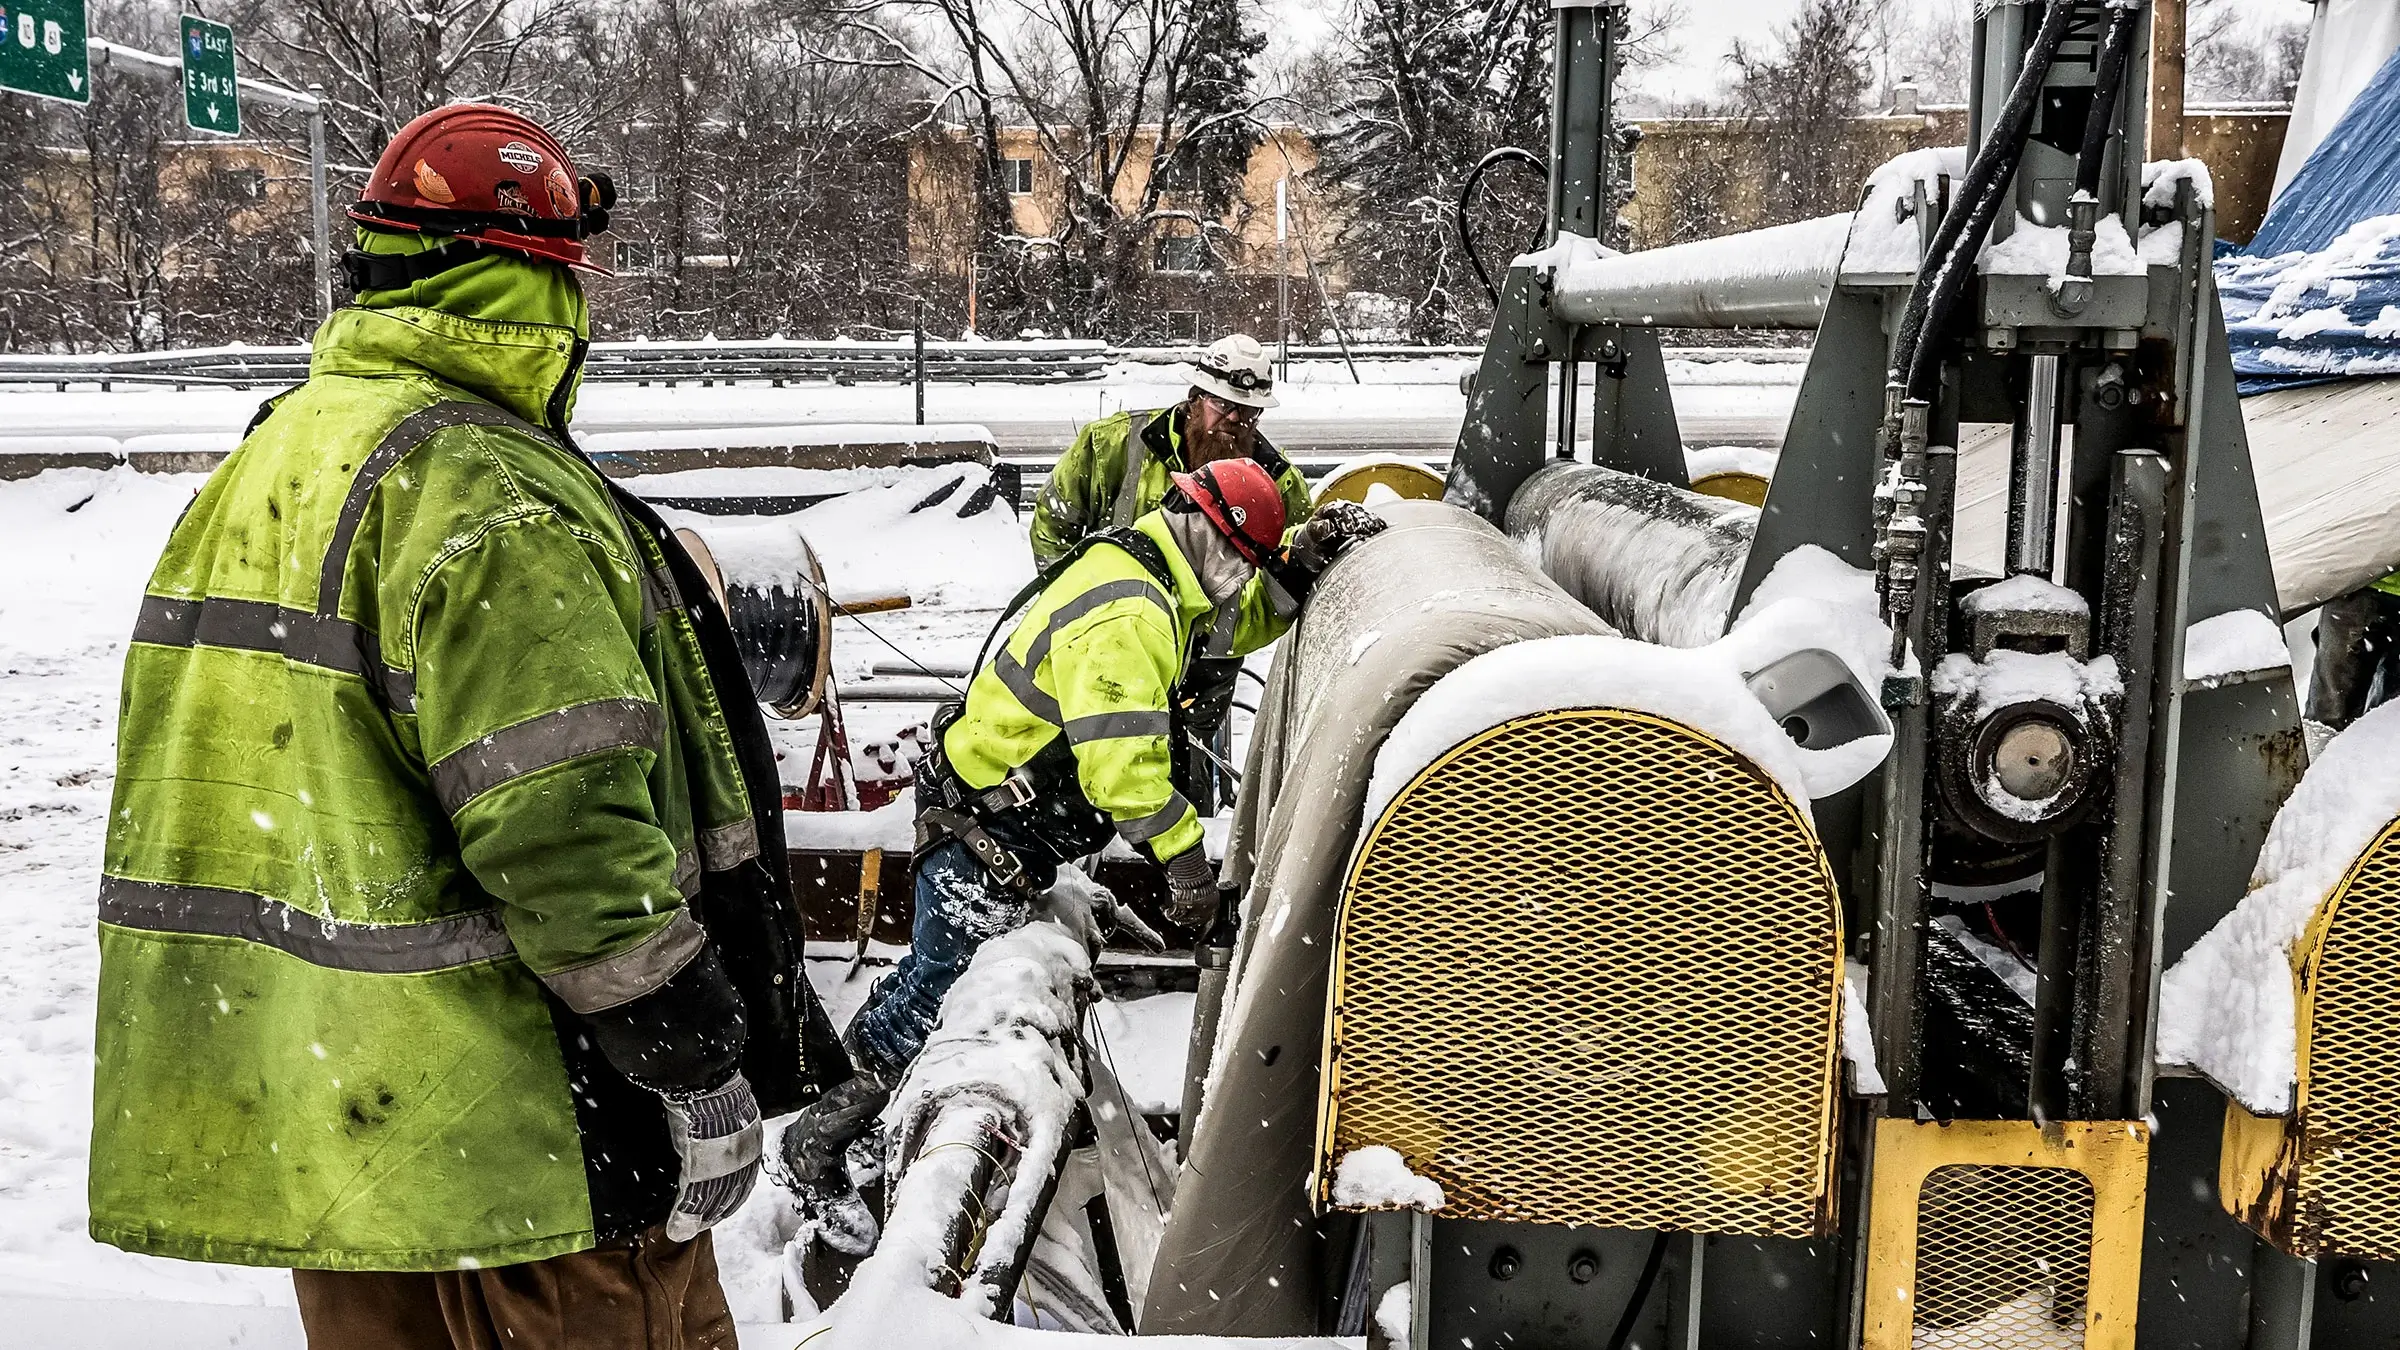 Three crew members operate on a sewer rehabiltion job in the snow near a busy freeway